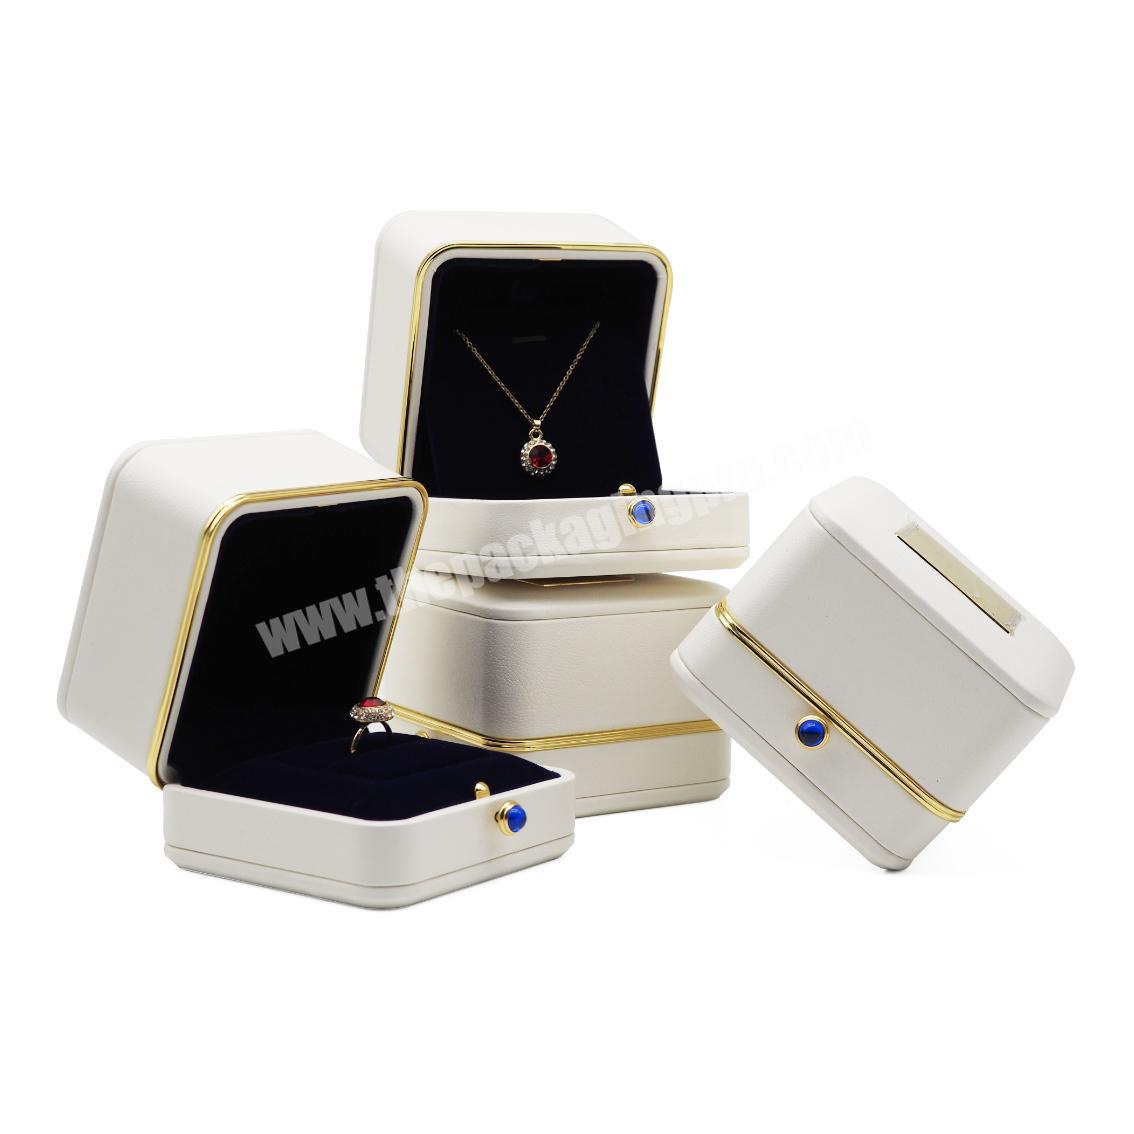 Wholesale Cheap White Gift Jewellery Boxes Leather Jewelry Box Set 2019